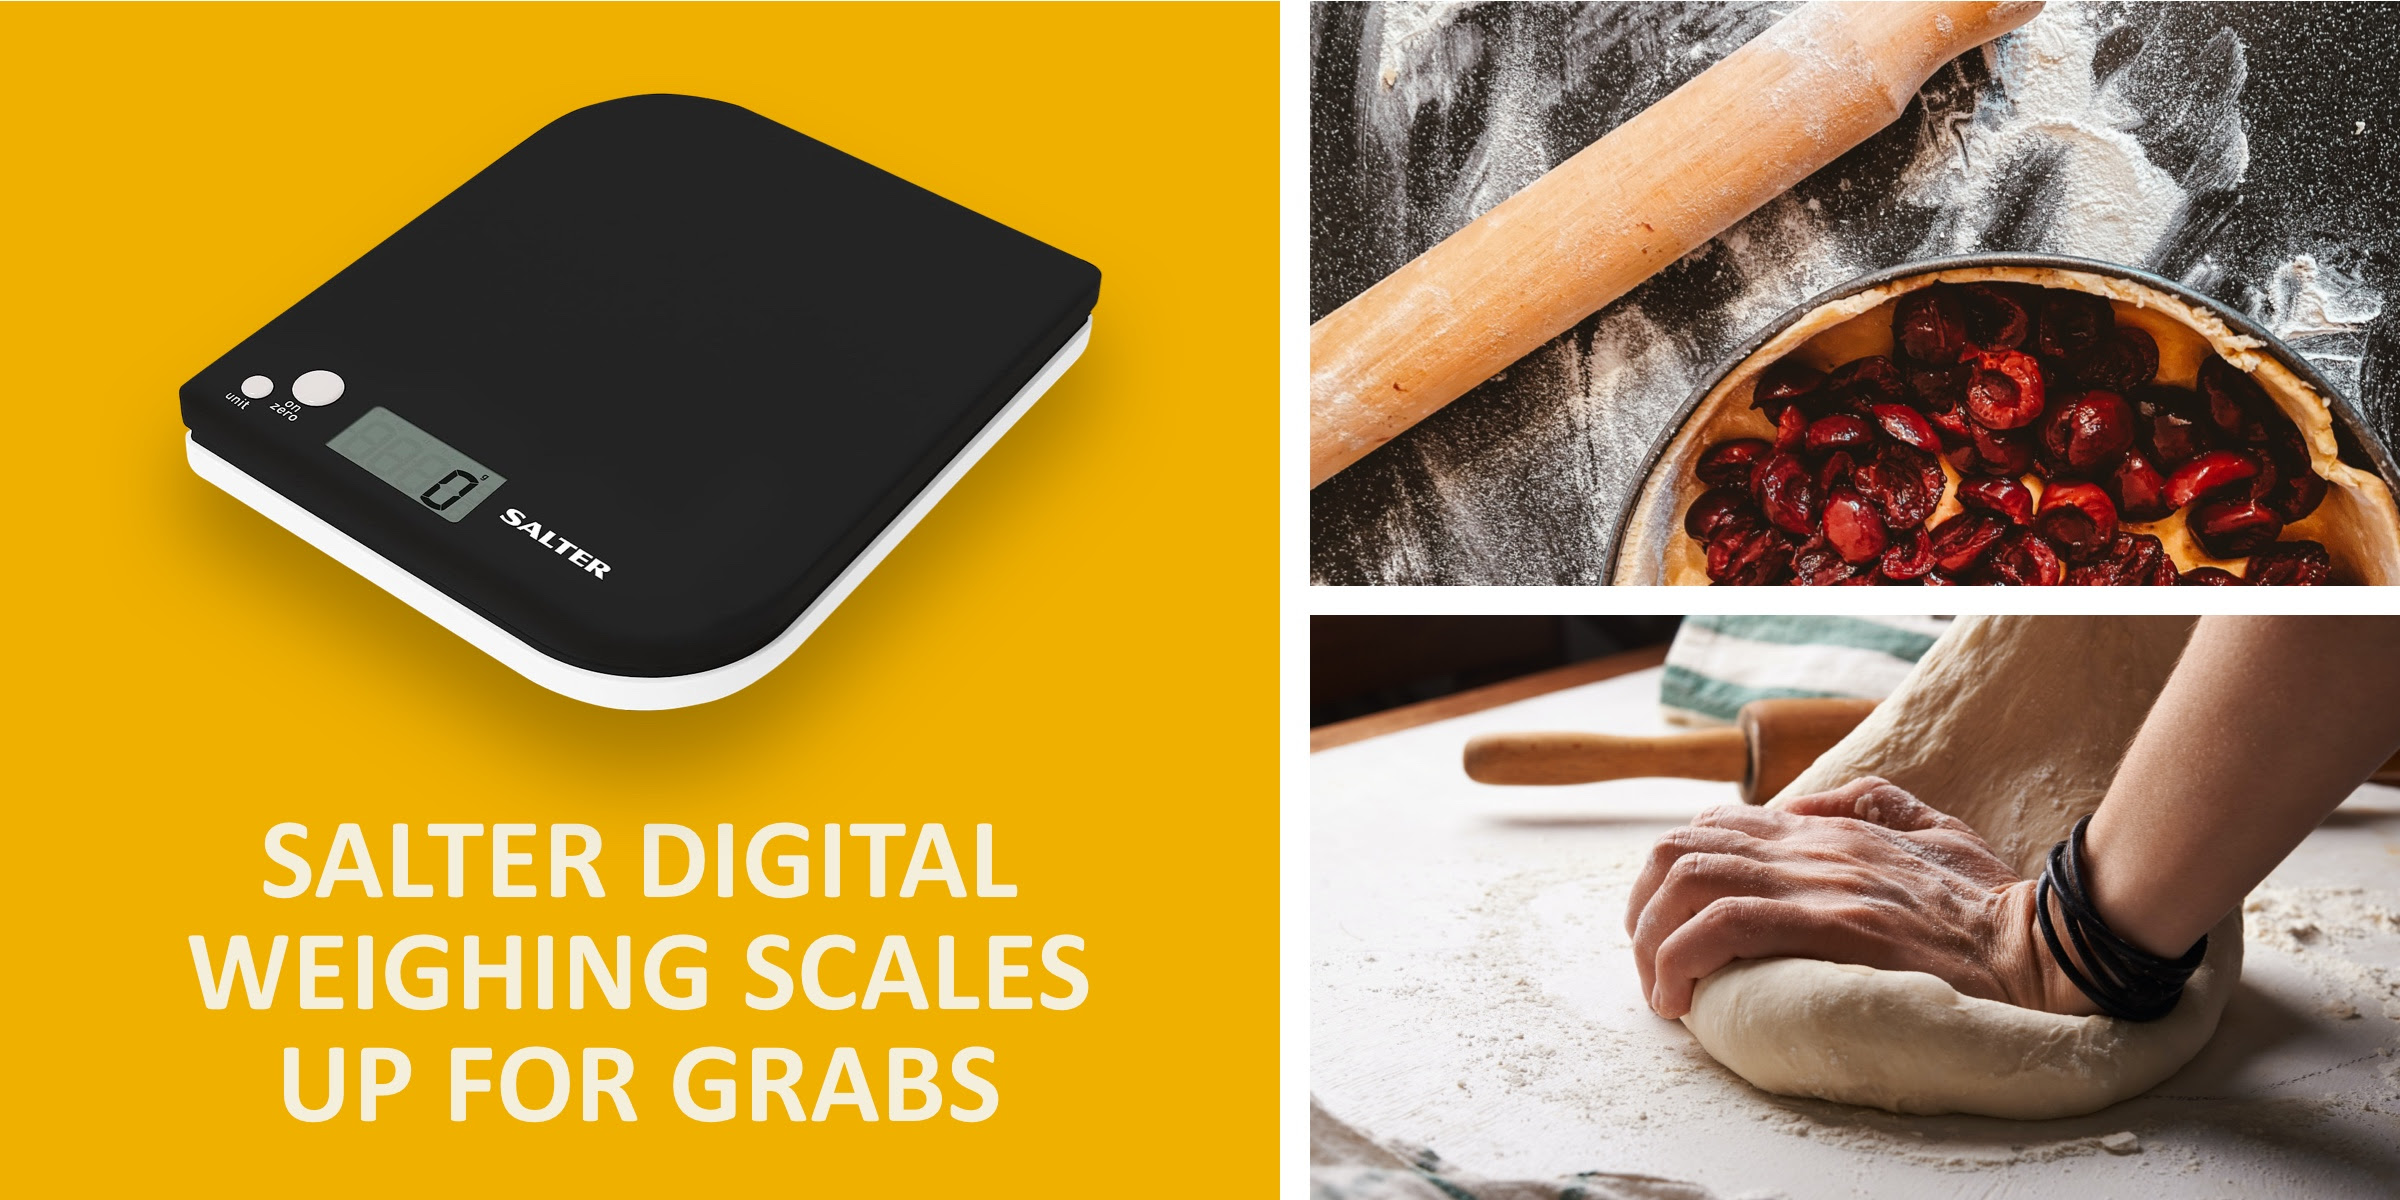 Win Salter digital kitchen weighing scales with JUST MILK